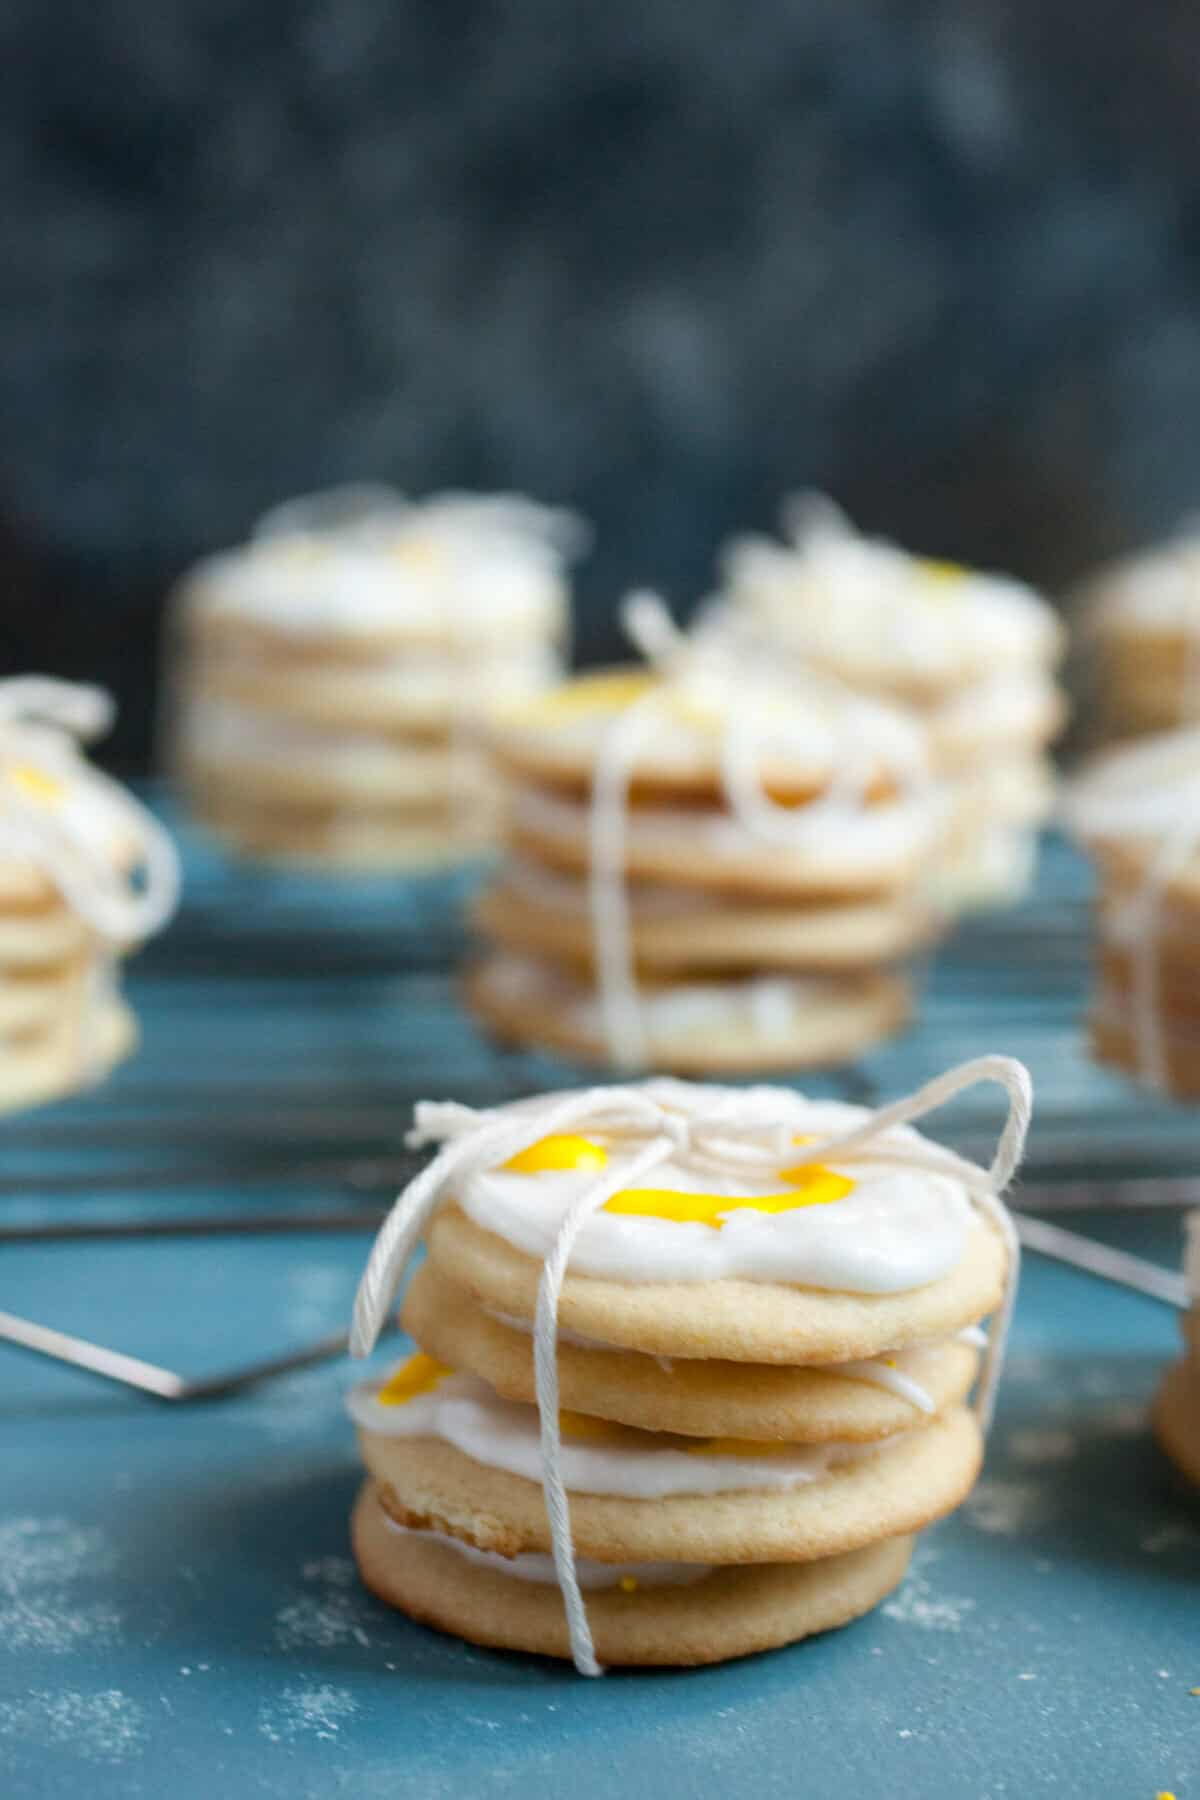 Lemon Butter Cookie Holiday Bundles: These little bundles of perfect lemon butter cookies will brighten any day. Make them for family, friends, or anyone how needs a pick-me-up! | macheesmo.com